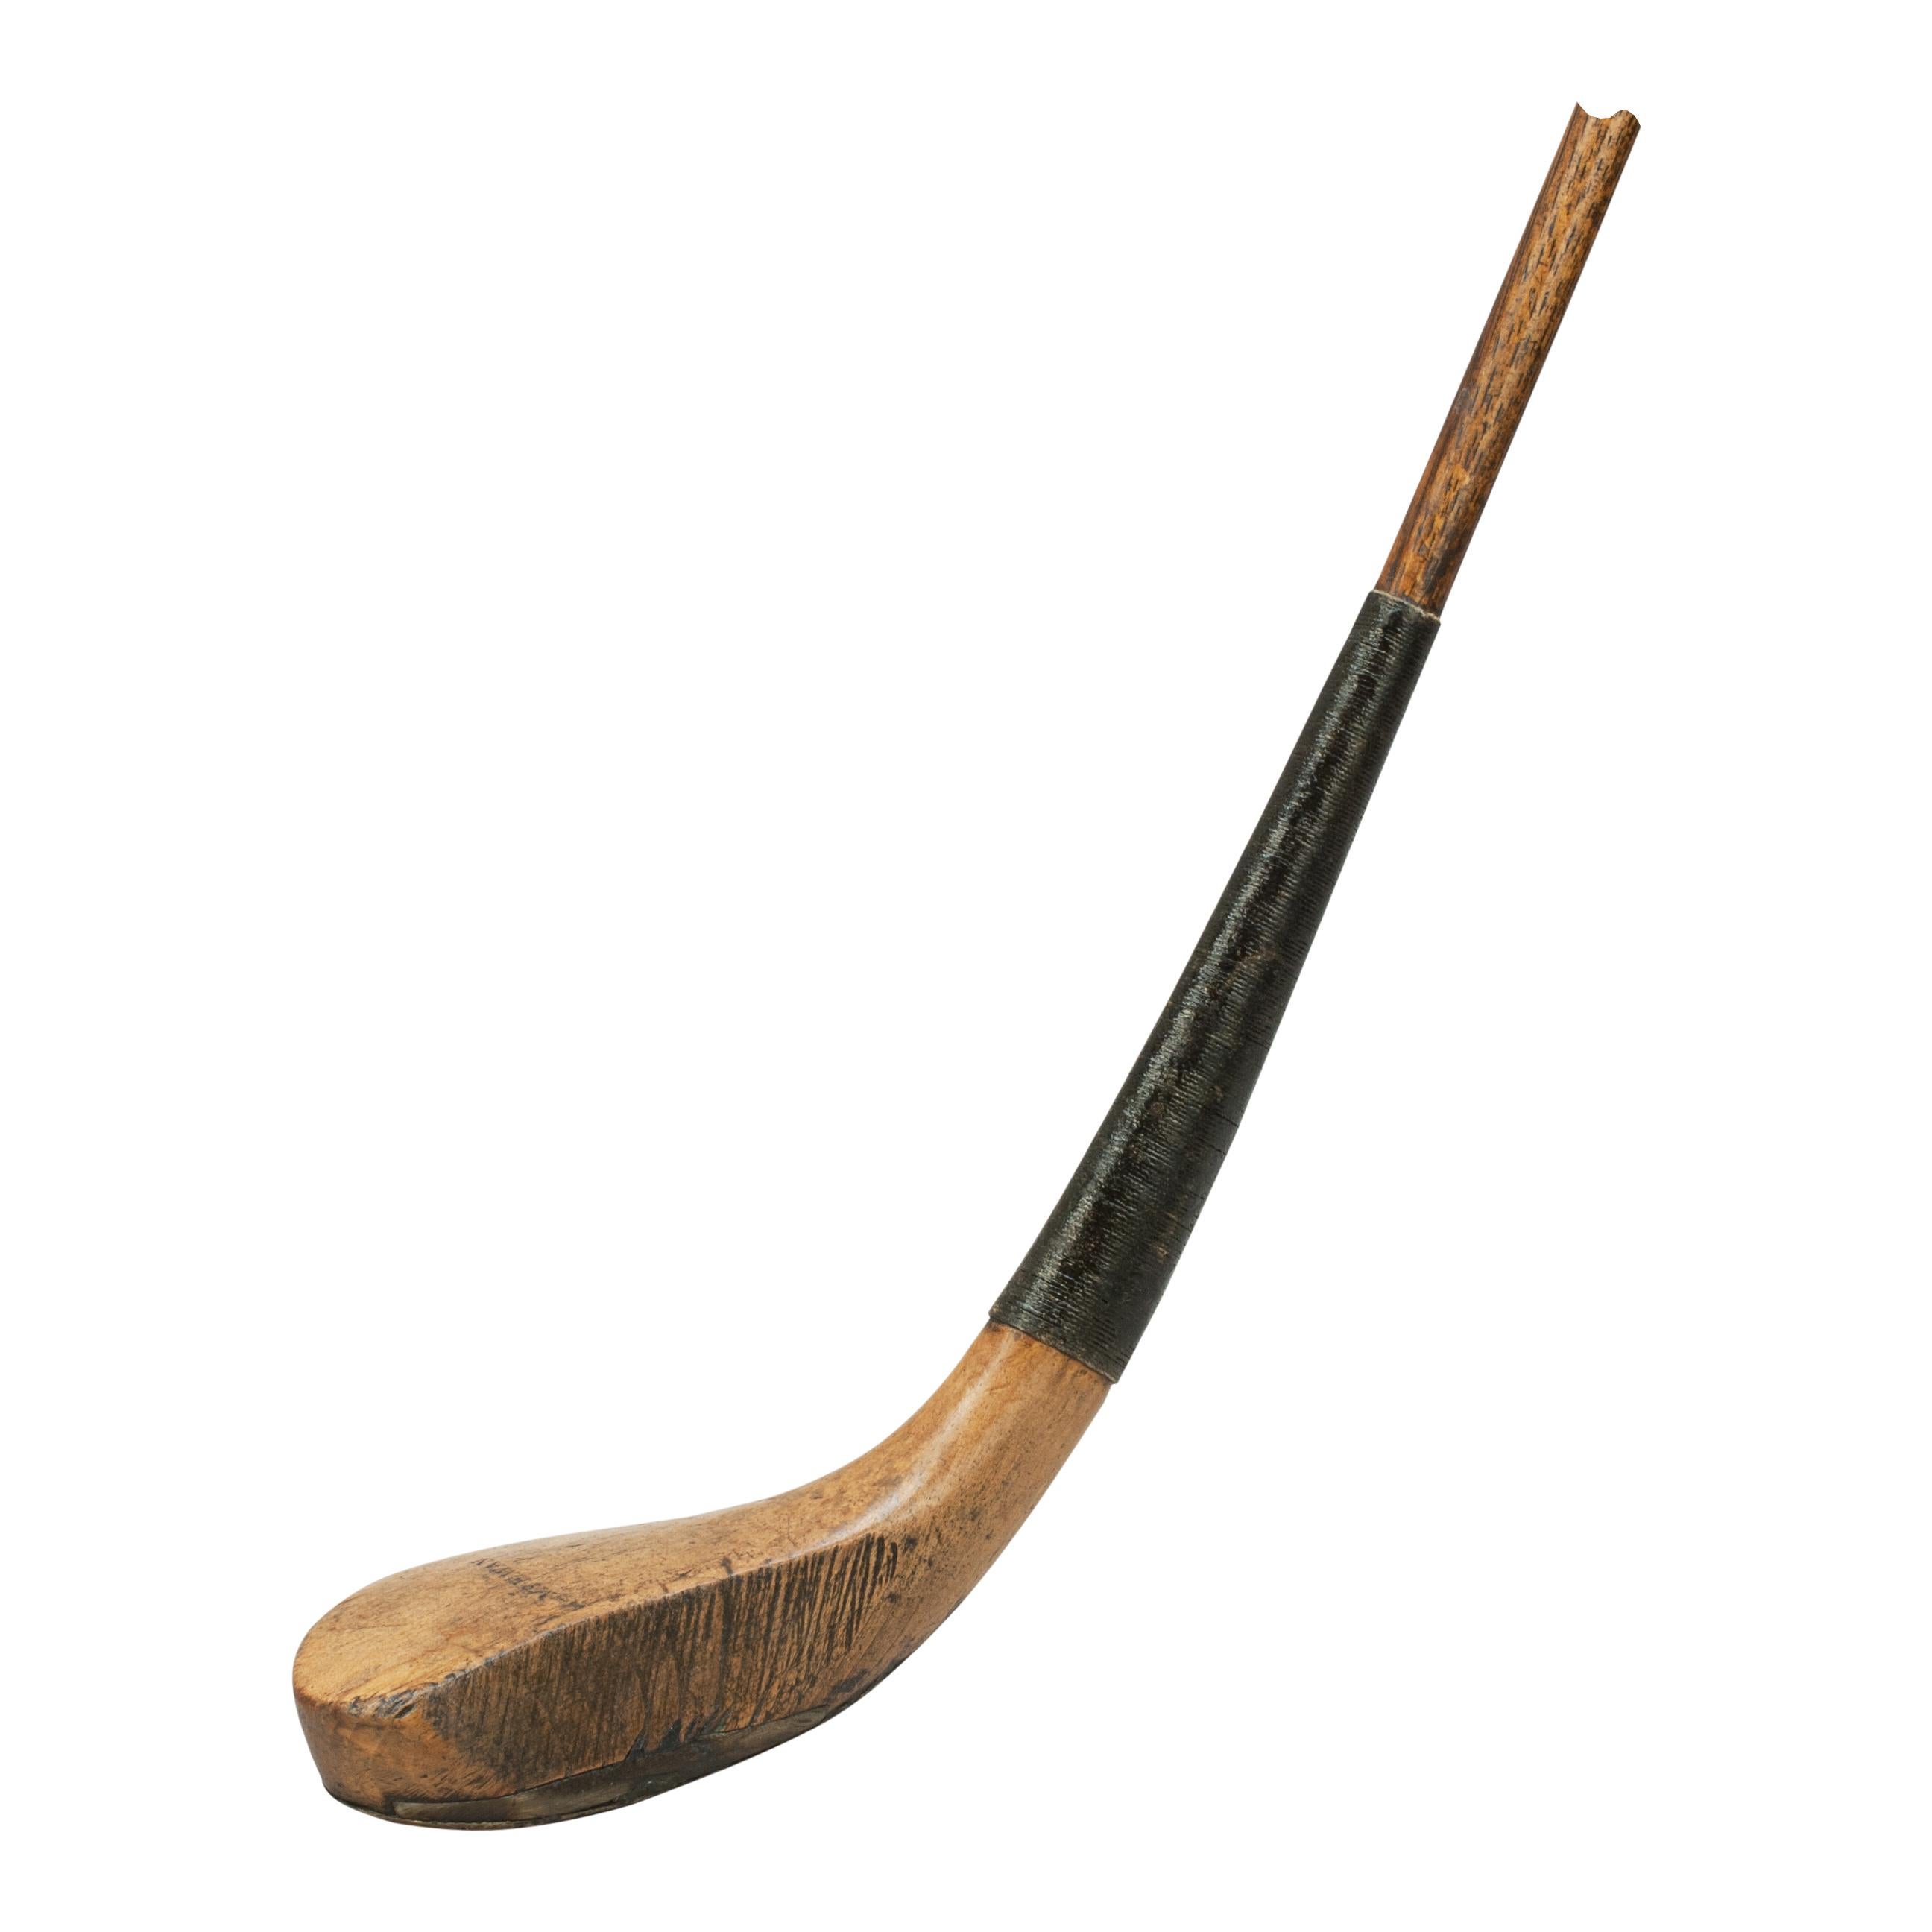 Antique Long Nose Golf Club, McEwan Of Musselburgh.
A fine long nose golf club, spoon by McEwan of Musselburgh. This club has a wonderful and graceful shape, only the like found on clubs you see from the best club makers such as H. Philp and R.